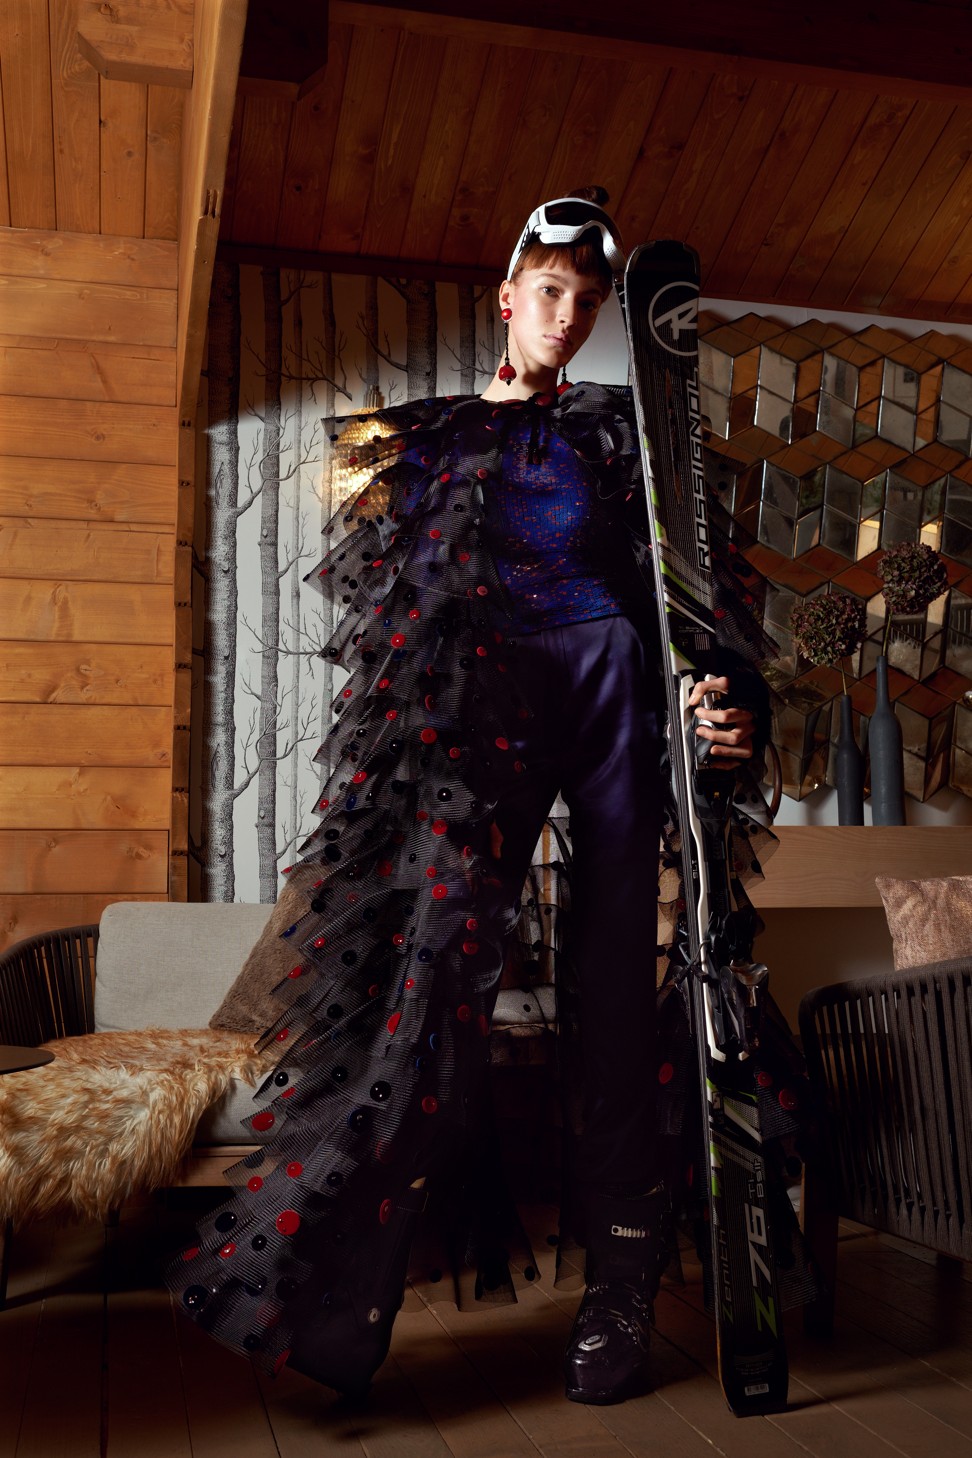 Giorgio Armani crinoline cape embroidered with point d'esprit effect crystals; top embroidered all over with sequins; royal blue silk satin pants; Rossignol skis; Salomon ski boots; stylist’s own ski goggles